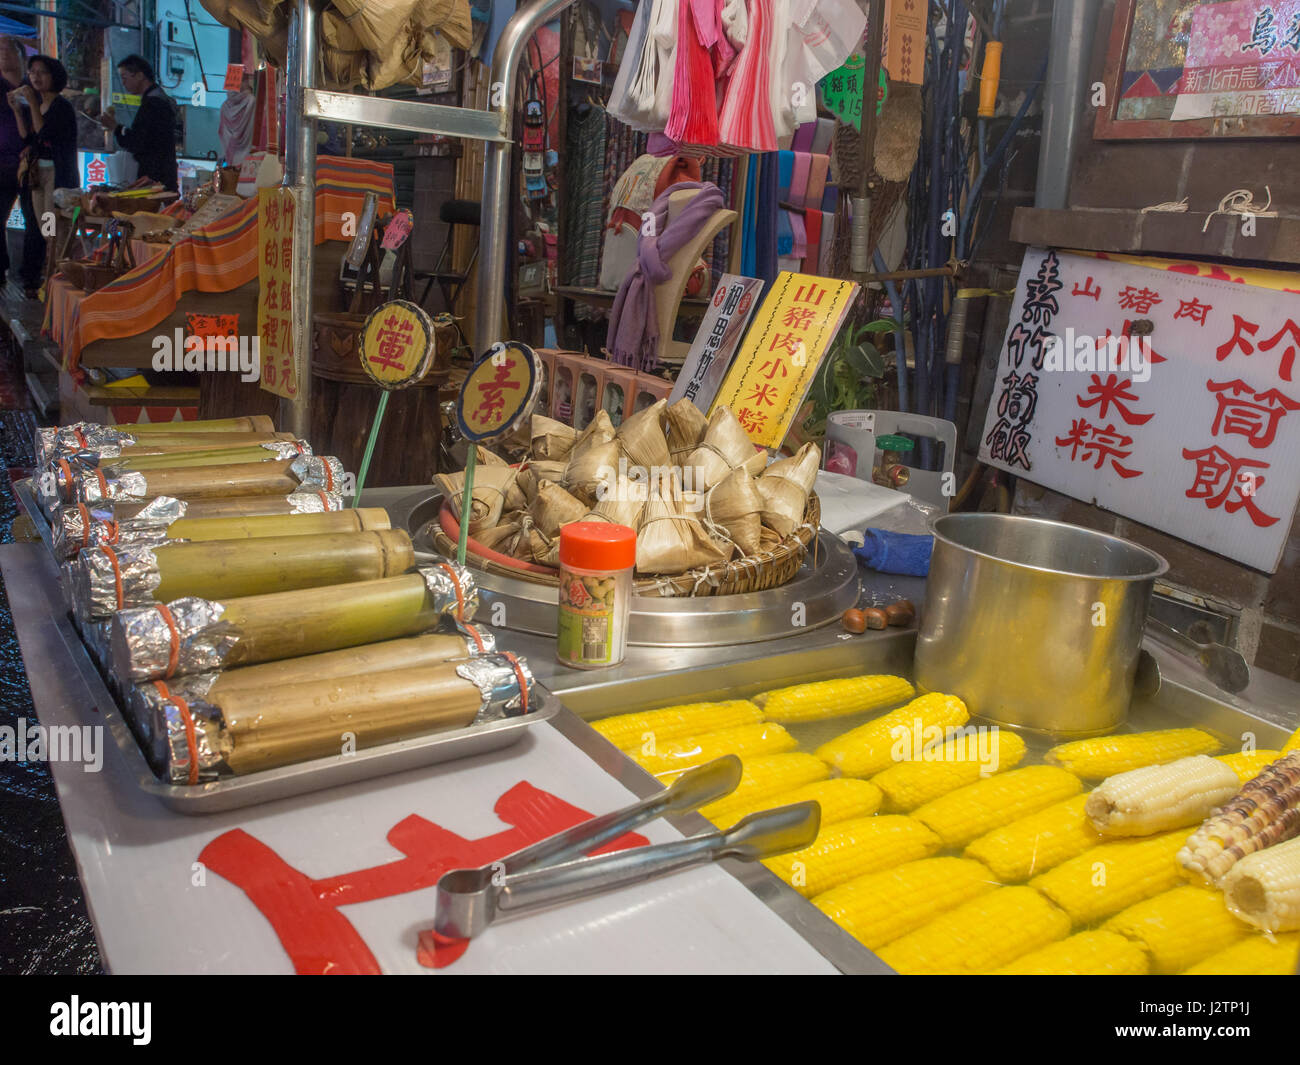 Wulai, Taiwan - October 09, 2016:  Rice Cooked in Bamboo Tubes and other local products. Bazaar in Wulai, Taiwan. Stock Photo